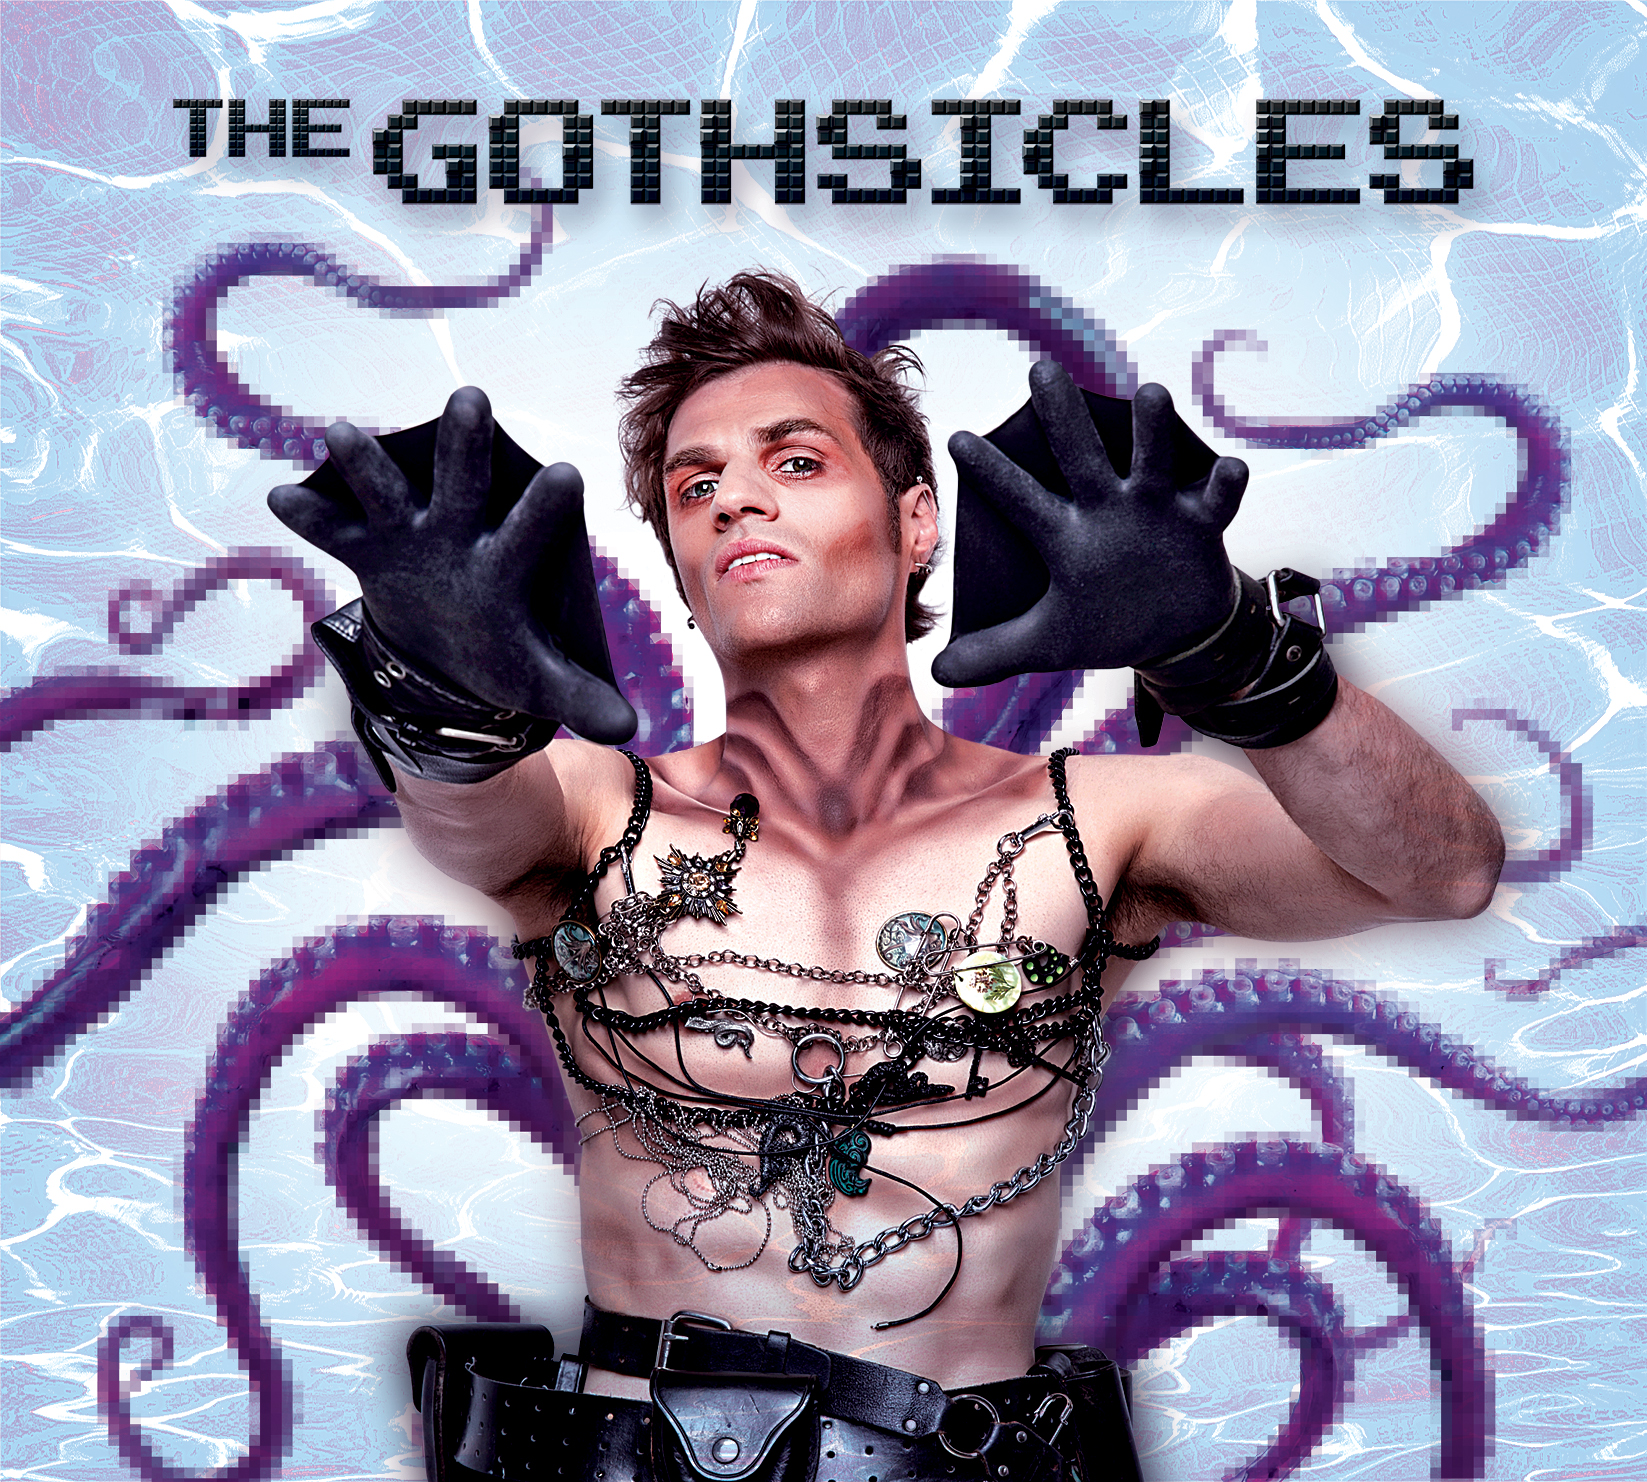 The Gothsicles promo pic